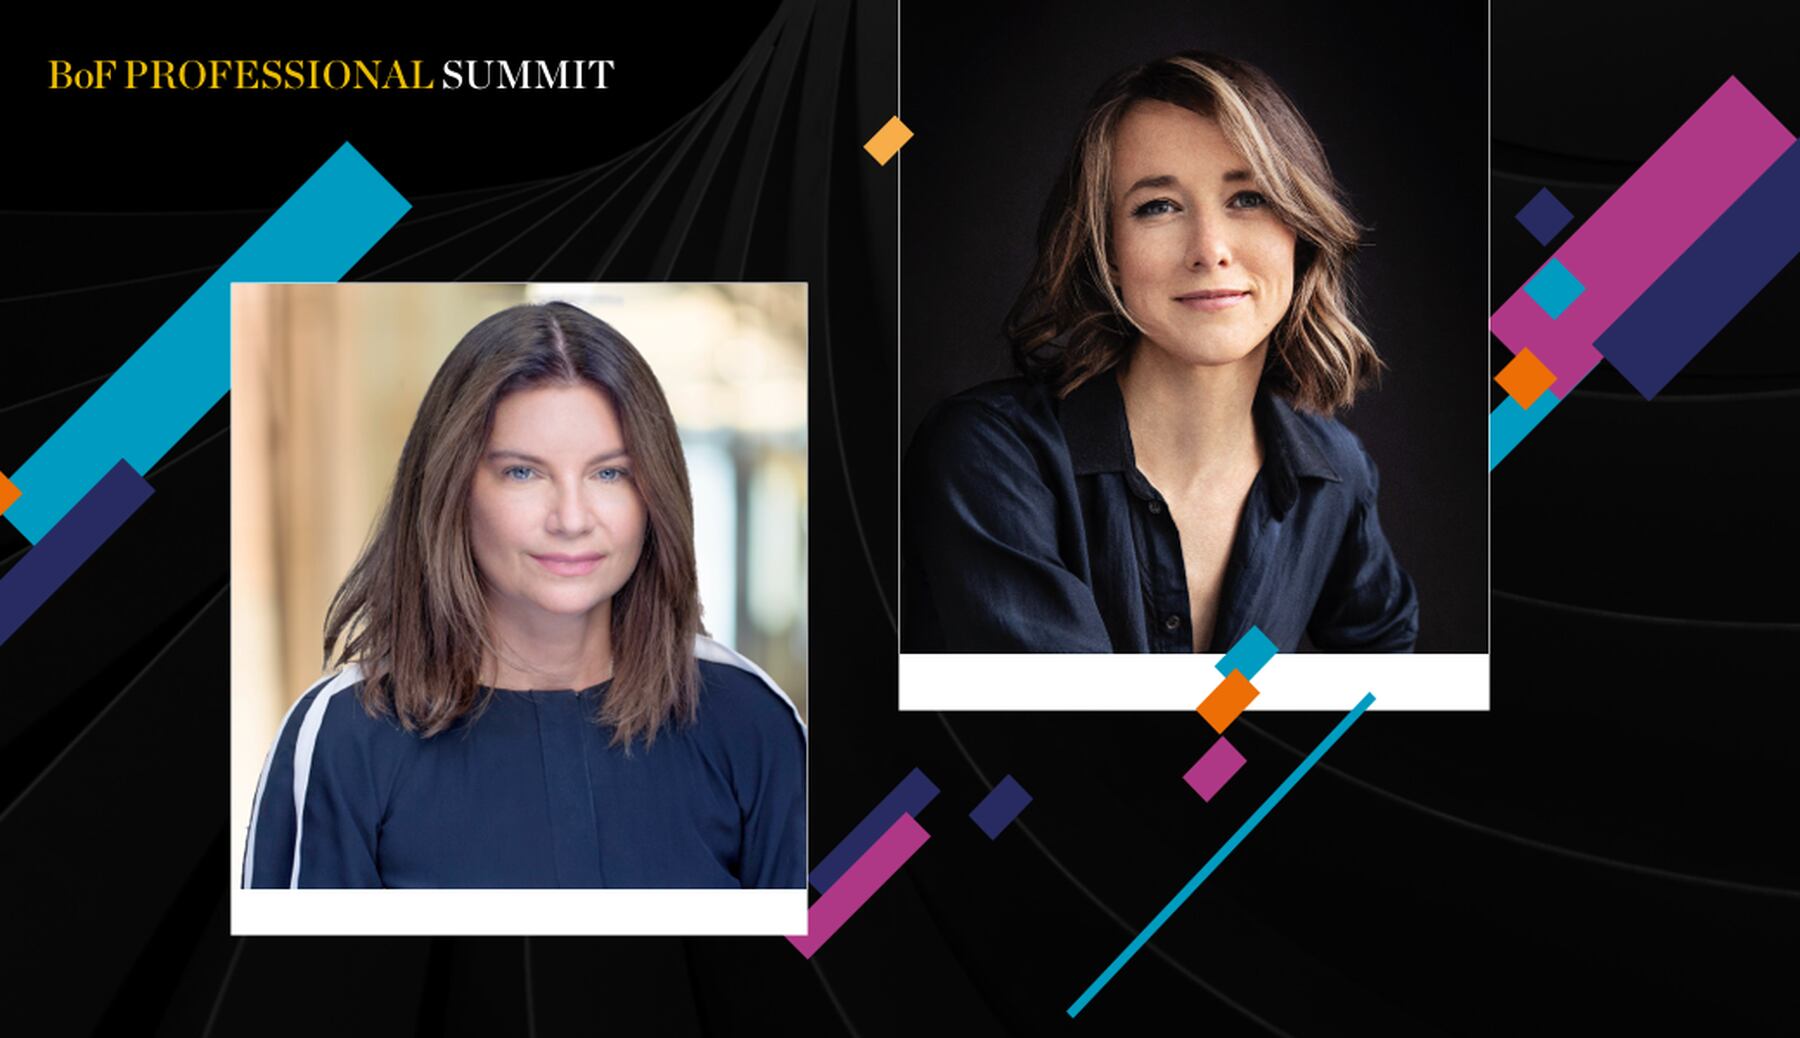 Natalie Massenet and Natasha Franck speaking at the BoF Professional Summit: New Frontiers in Fashion and Technology